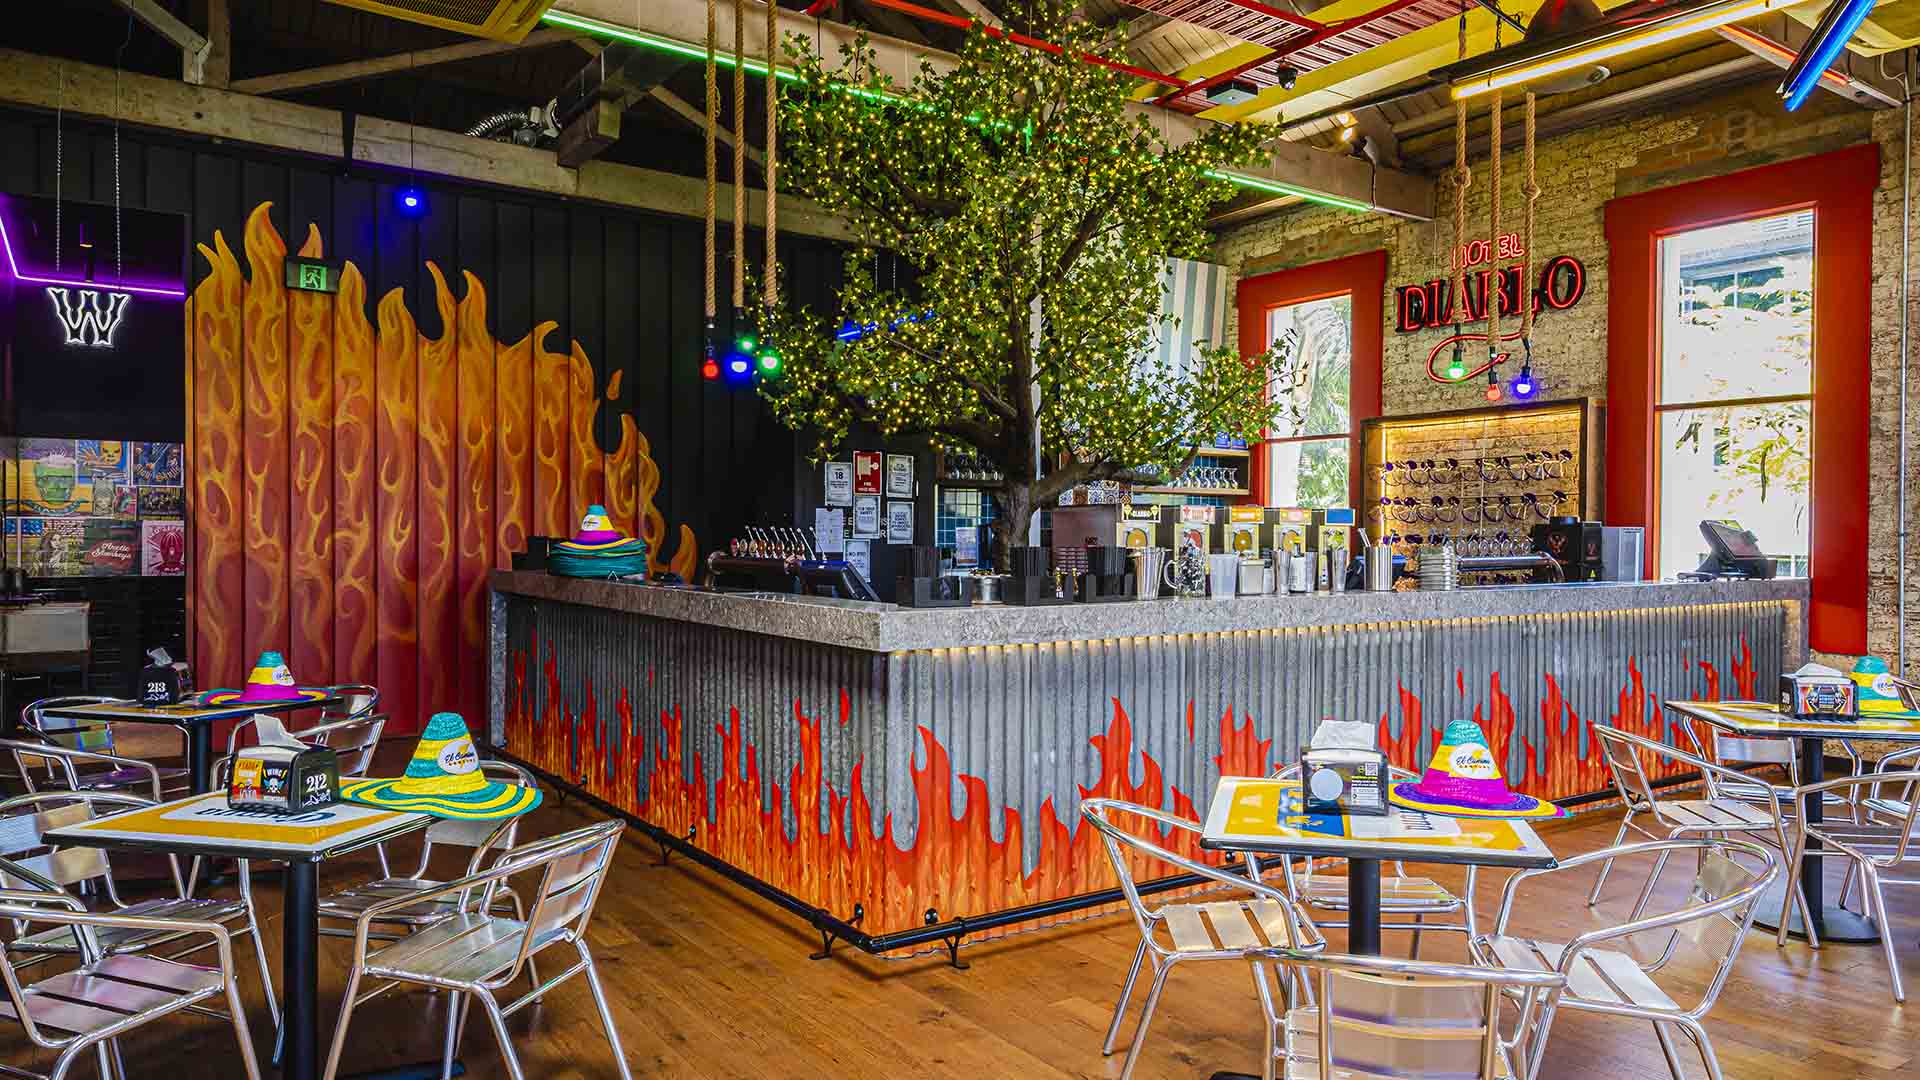 El Camino Cantina Has Opened a New Two-Level South Bank Joint with DJs and a Dance Floor